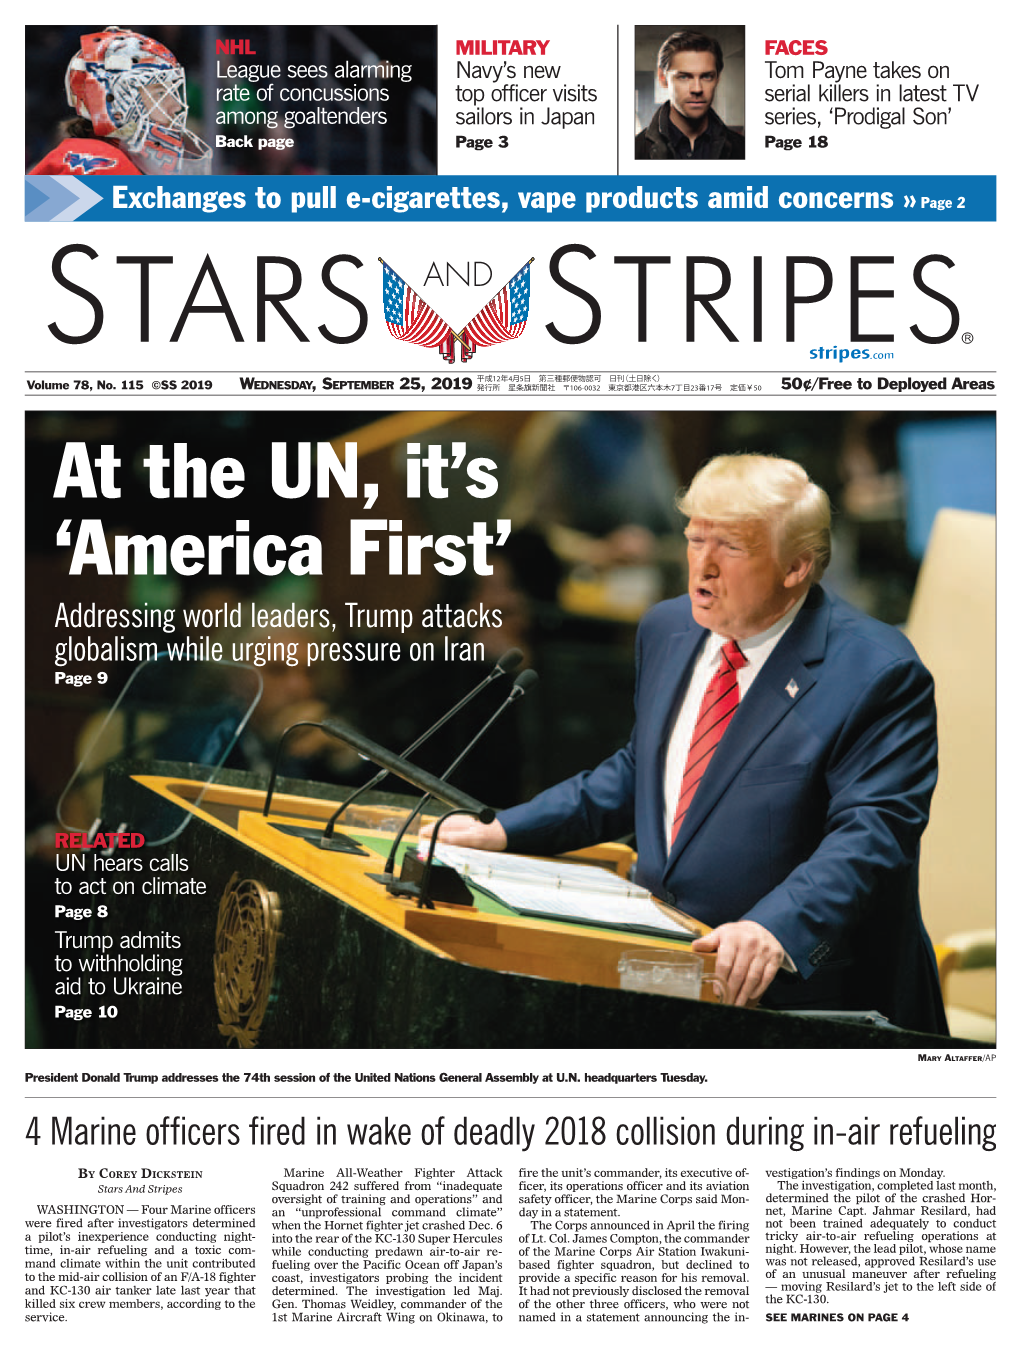 America First’ Addressing World Leaders, Trump Attacks Globalism While Urging Pressure on Iran Page 9